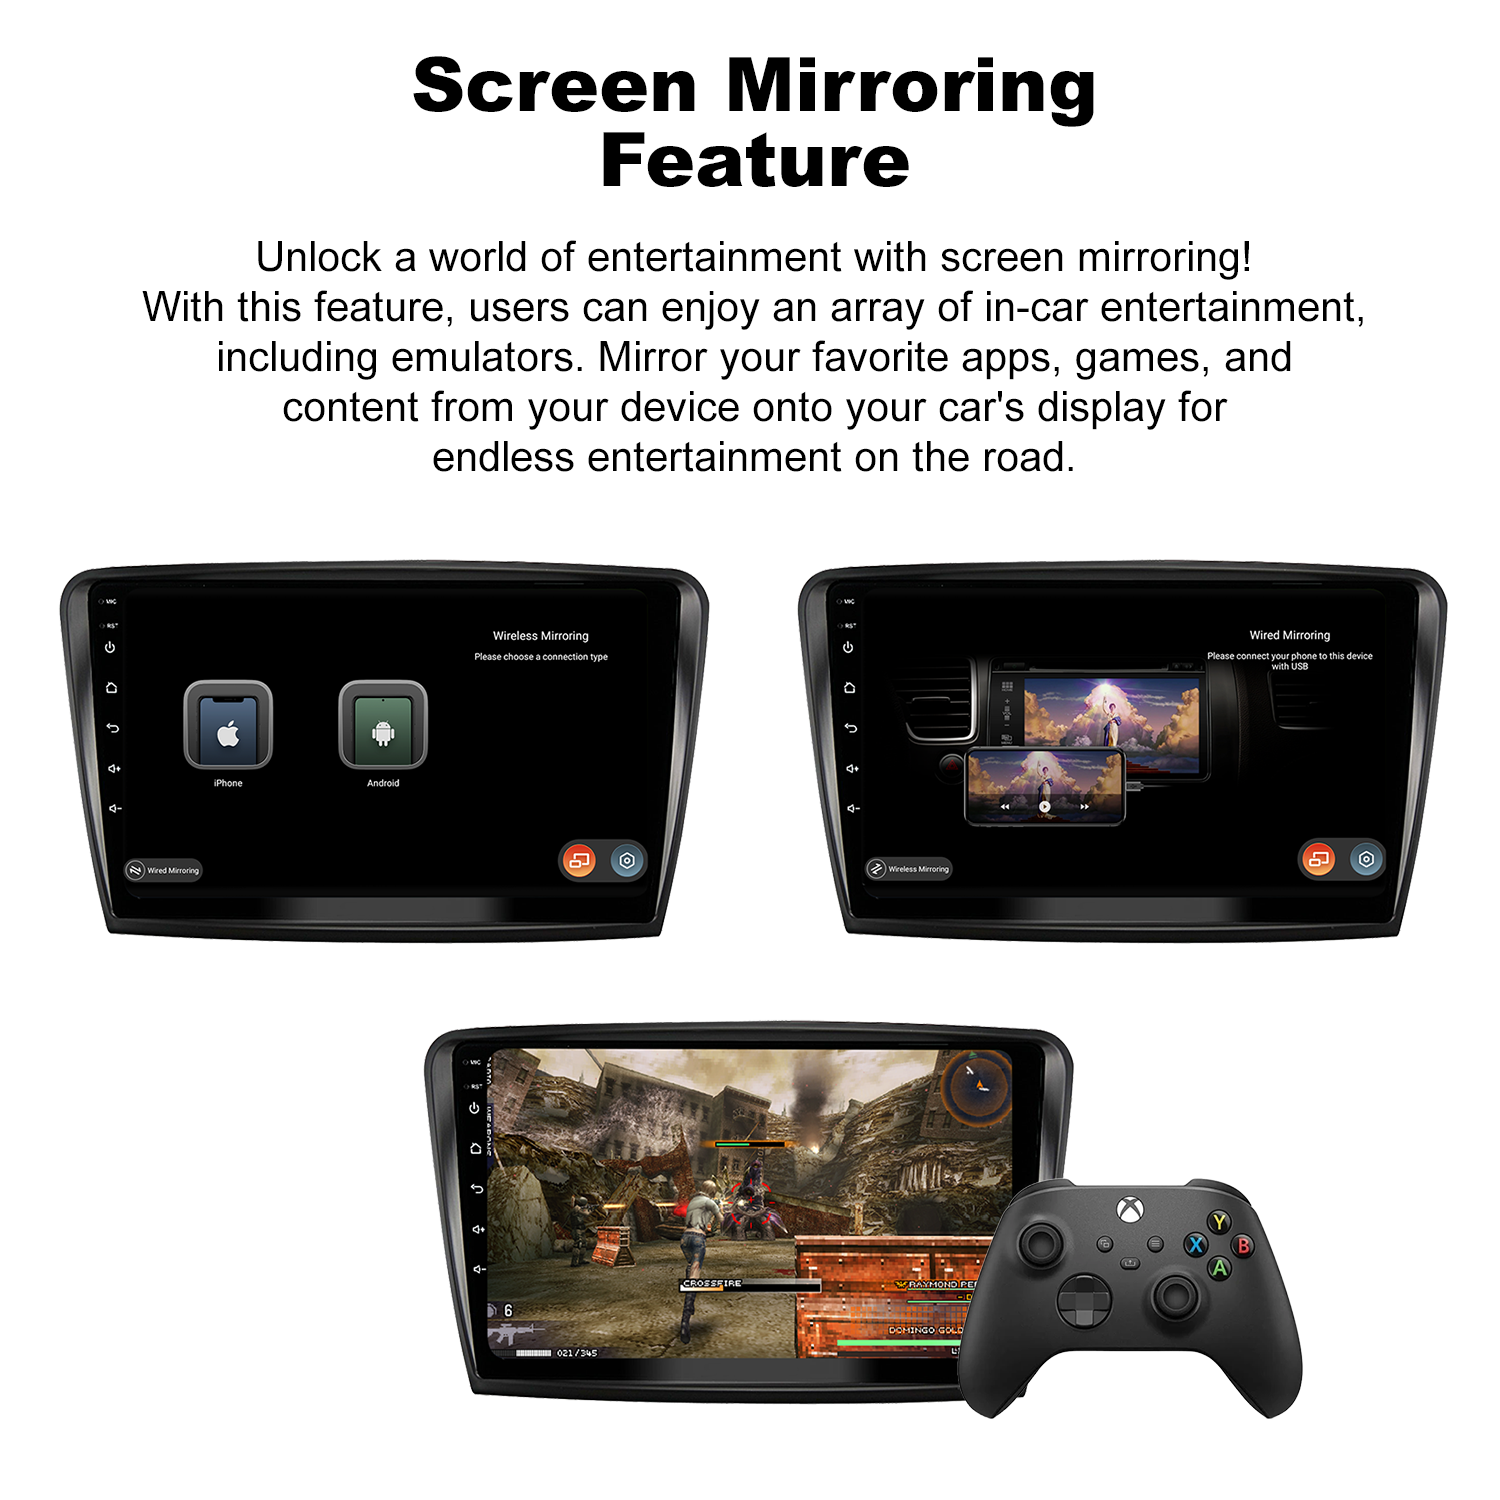 A photo highlights the feature of this upgrade kit, a message "Unlock a world of entertainment with screen mirroring! With this feature, users can enjoy an array of in-car entertainment, including emulators. Mirror your favorite apps, games, and content from your device onto your car's display for endless entertainment on the road." is placed under the title "Screen Mirroring Feature". Users can Wirelessly mirror phones or connect via USB.